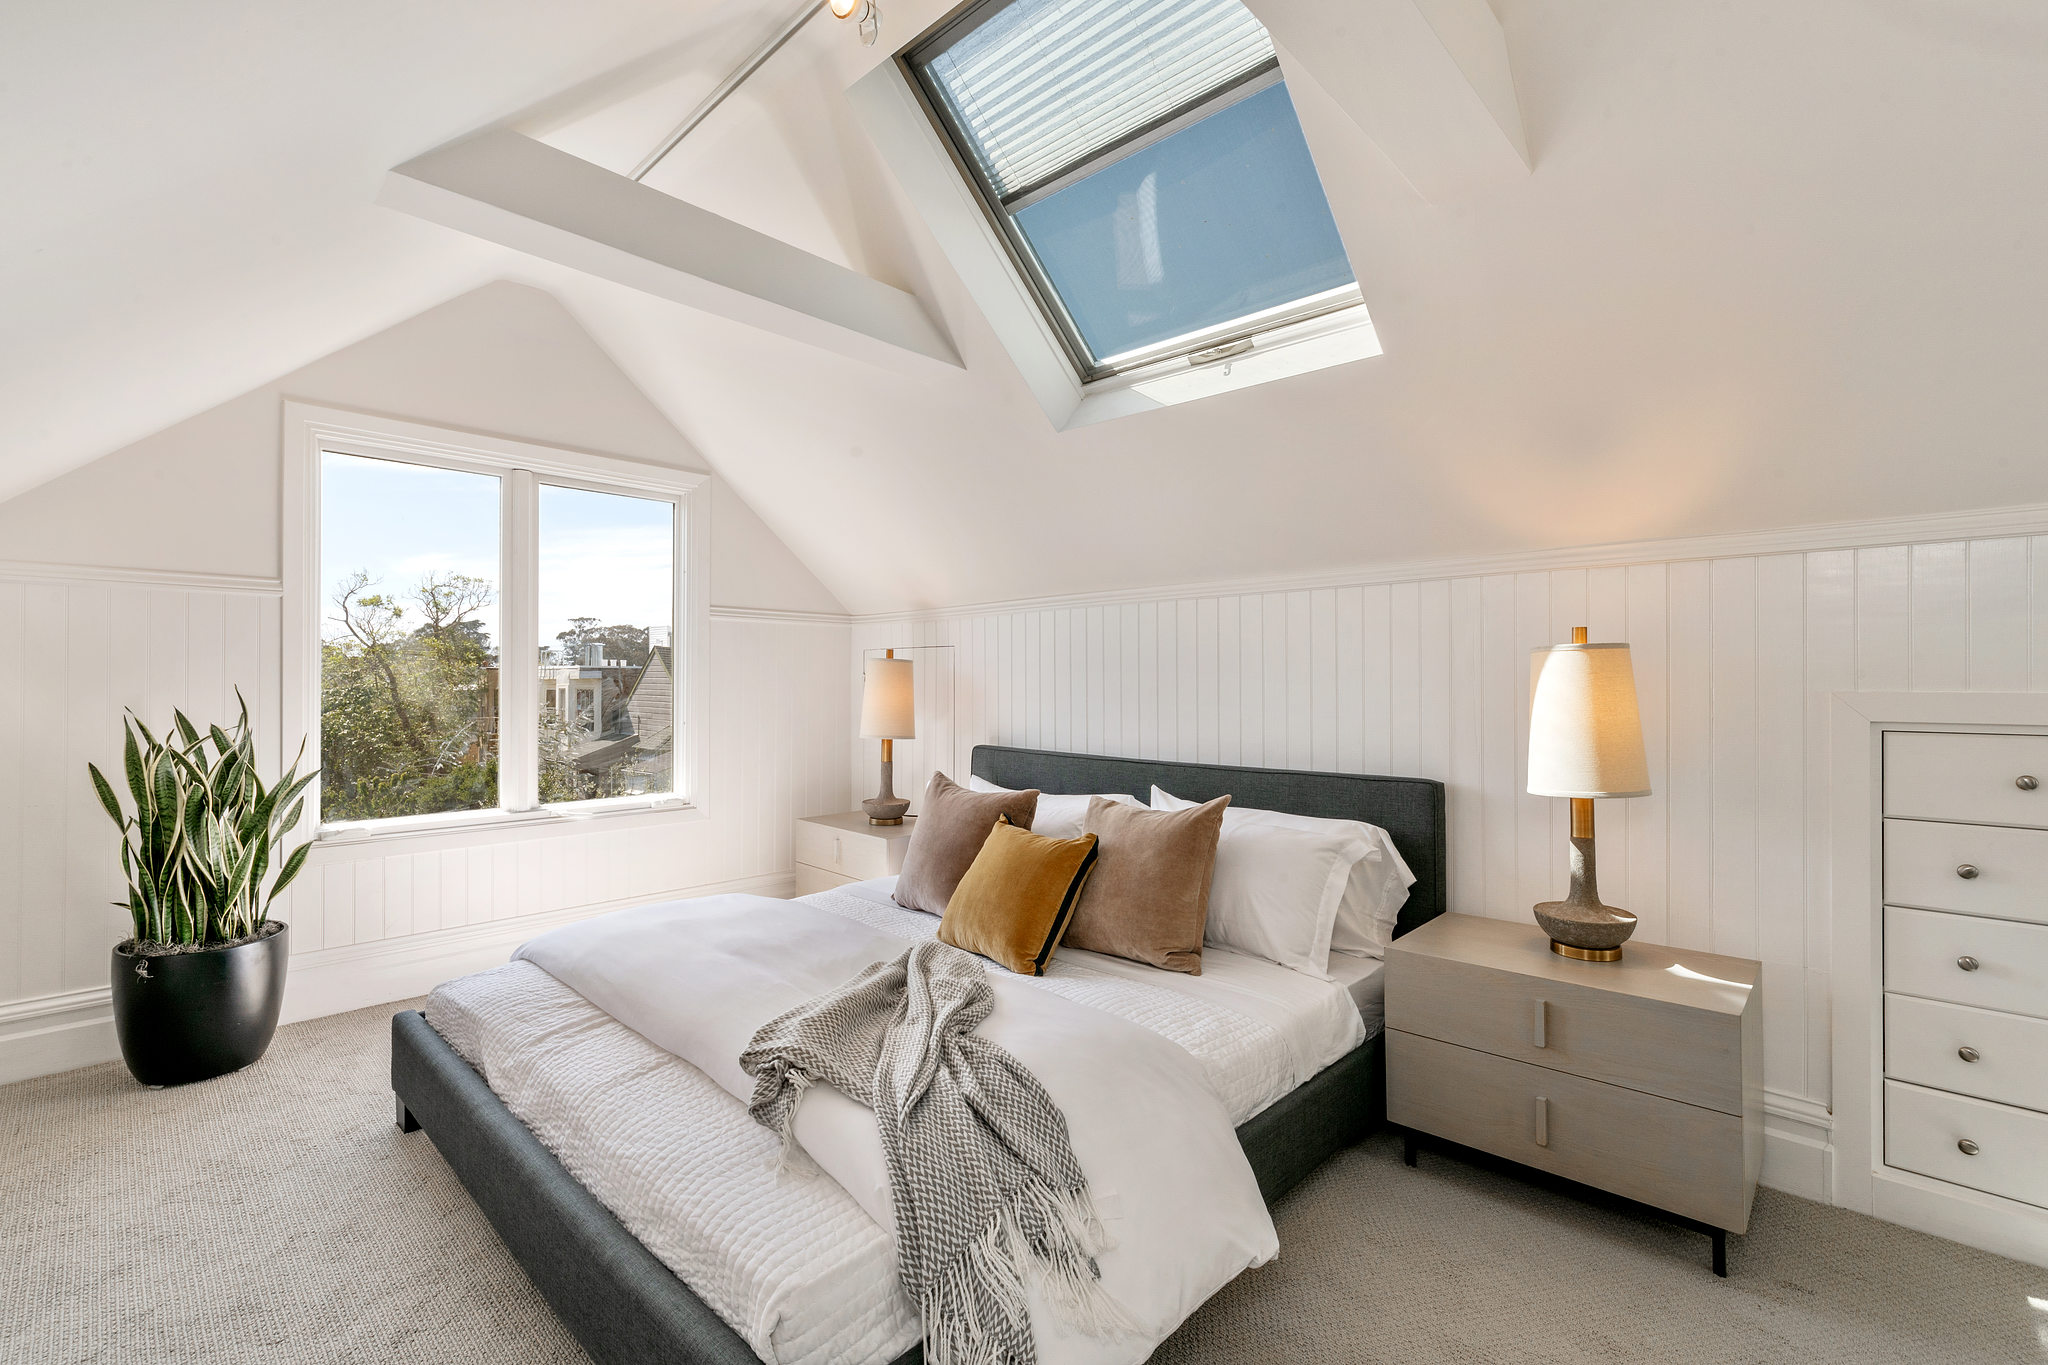 Property Photo: Bedroom with skylights and white wood walls